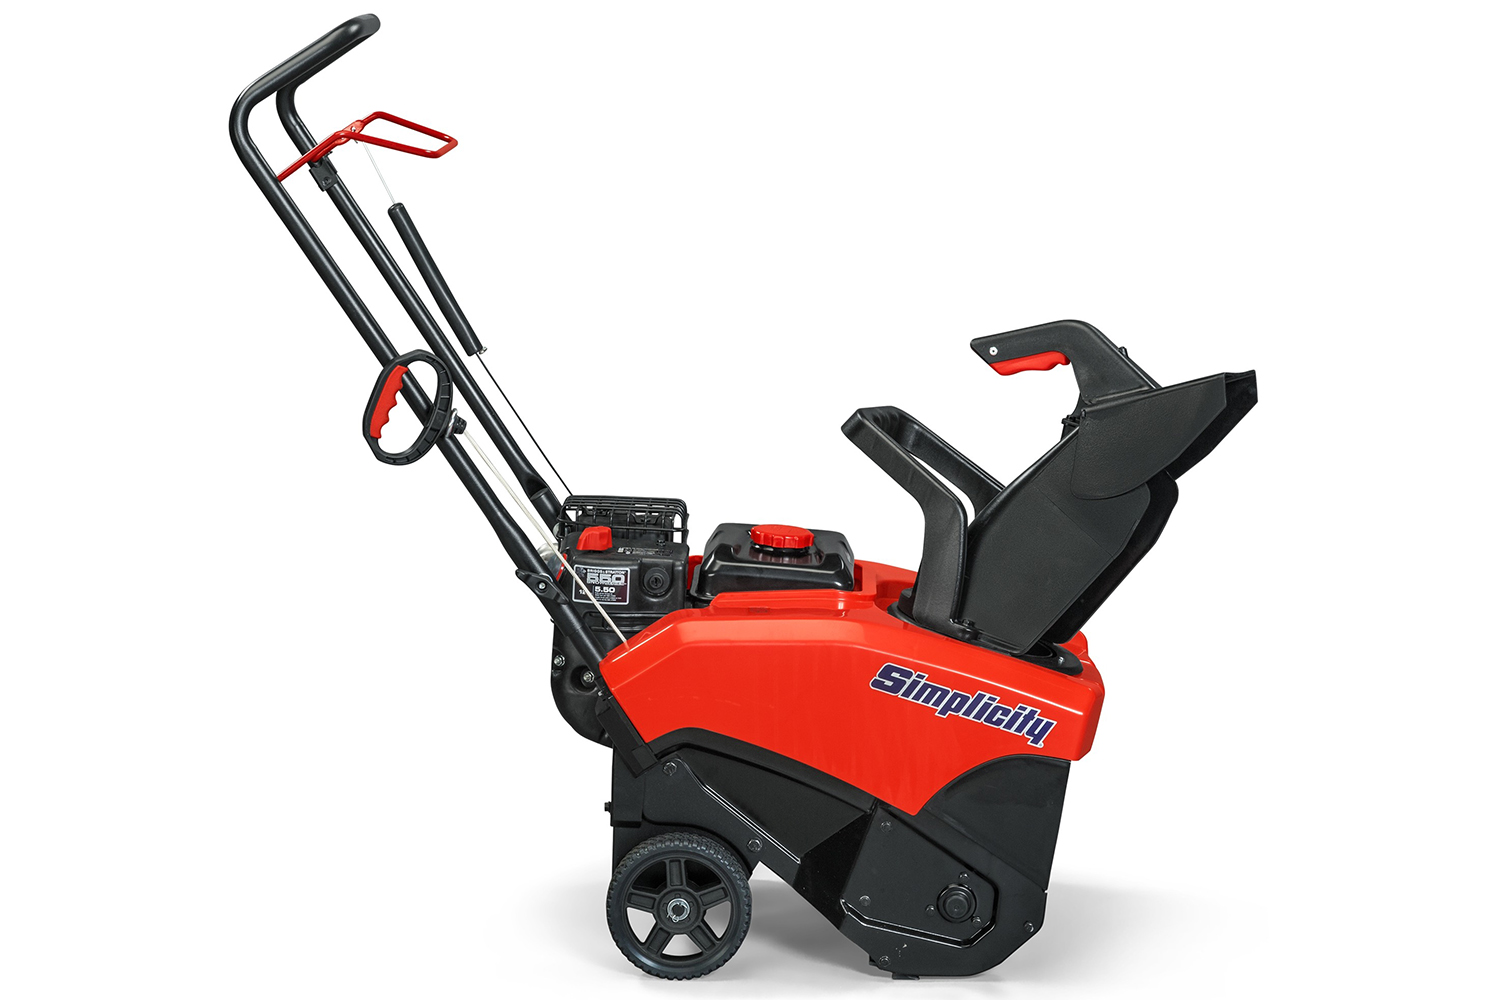 SIMPLICITY SINGLE-STAGE SNOW BLOWER 618<br/>*Model shown in image may vary.